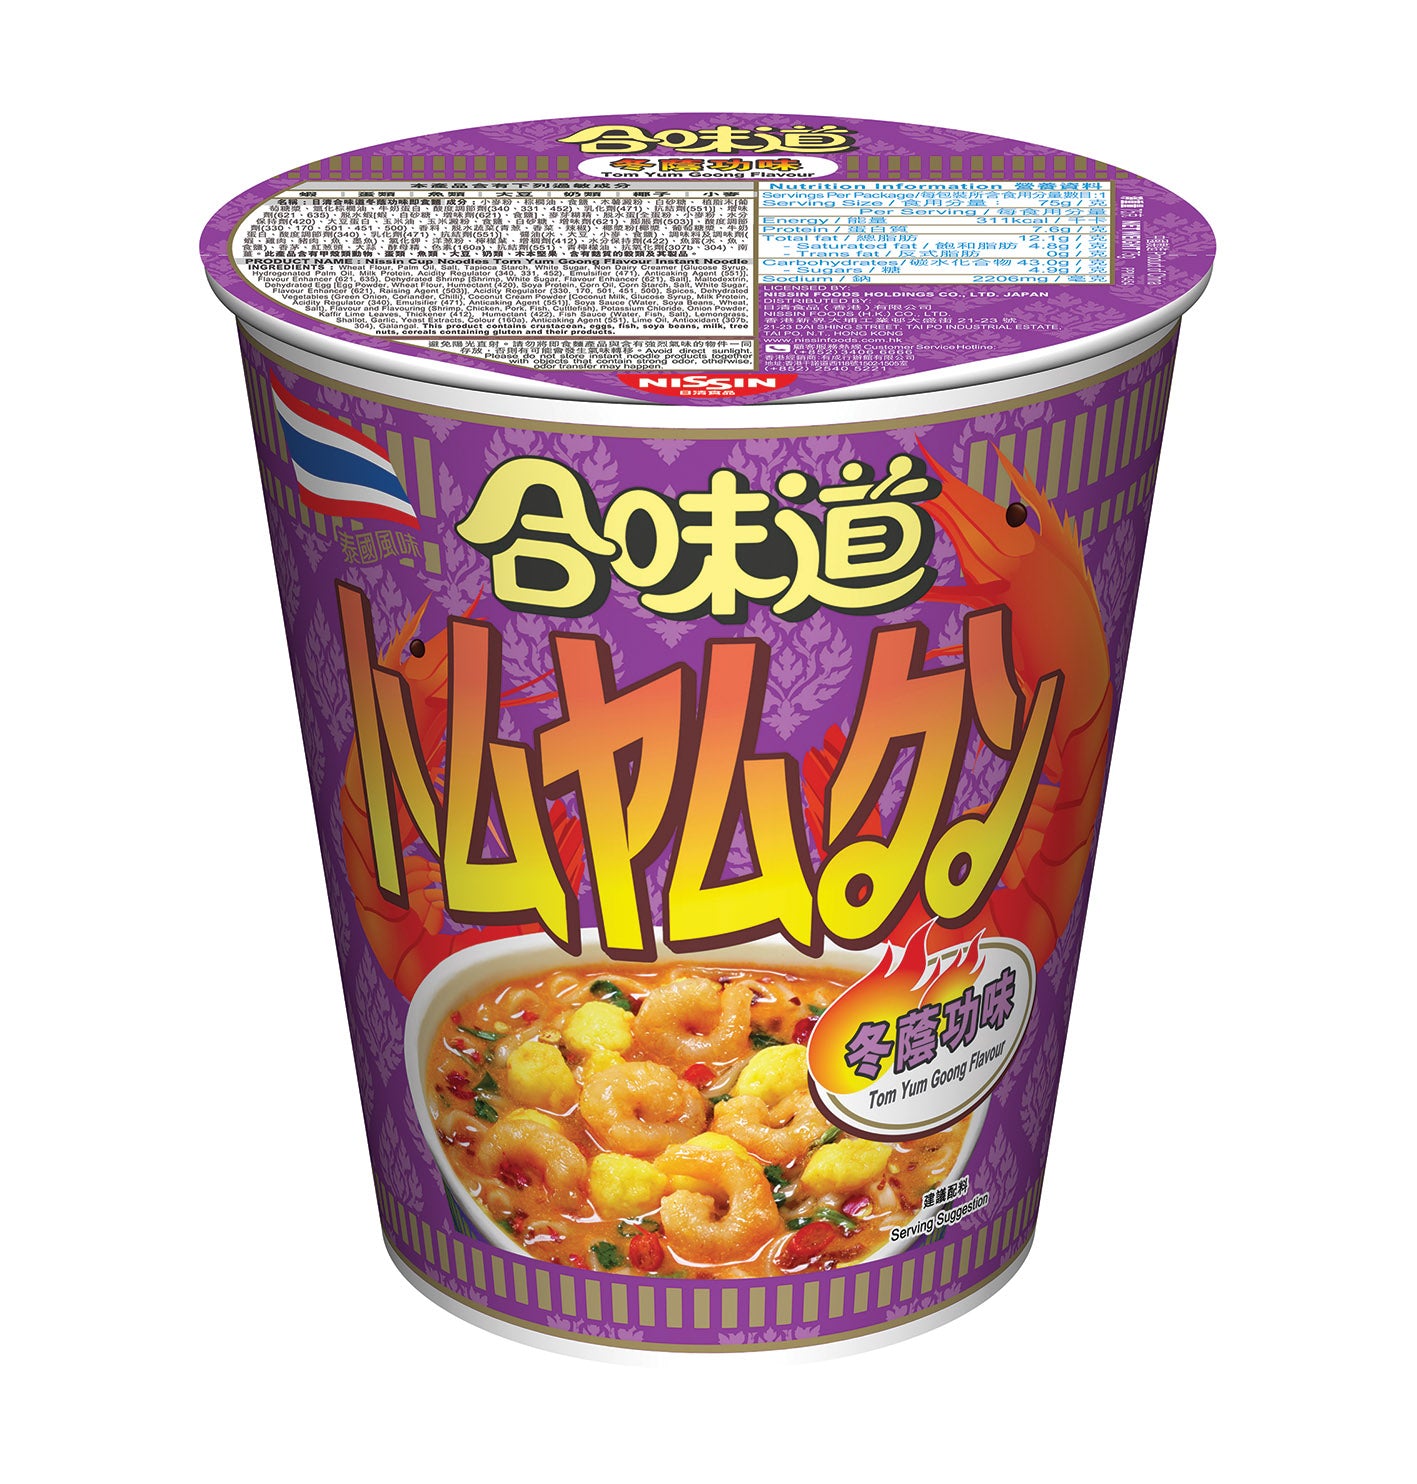 NISSIN CUP NOODLE - TOM YUM GOONG 75G 日清 合味道杯麵-冬蔭功味 75G